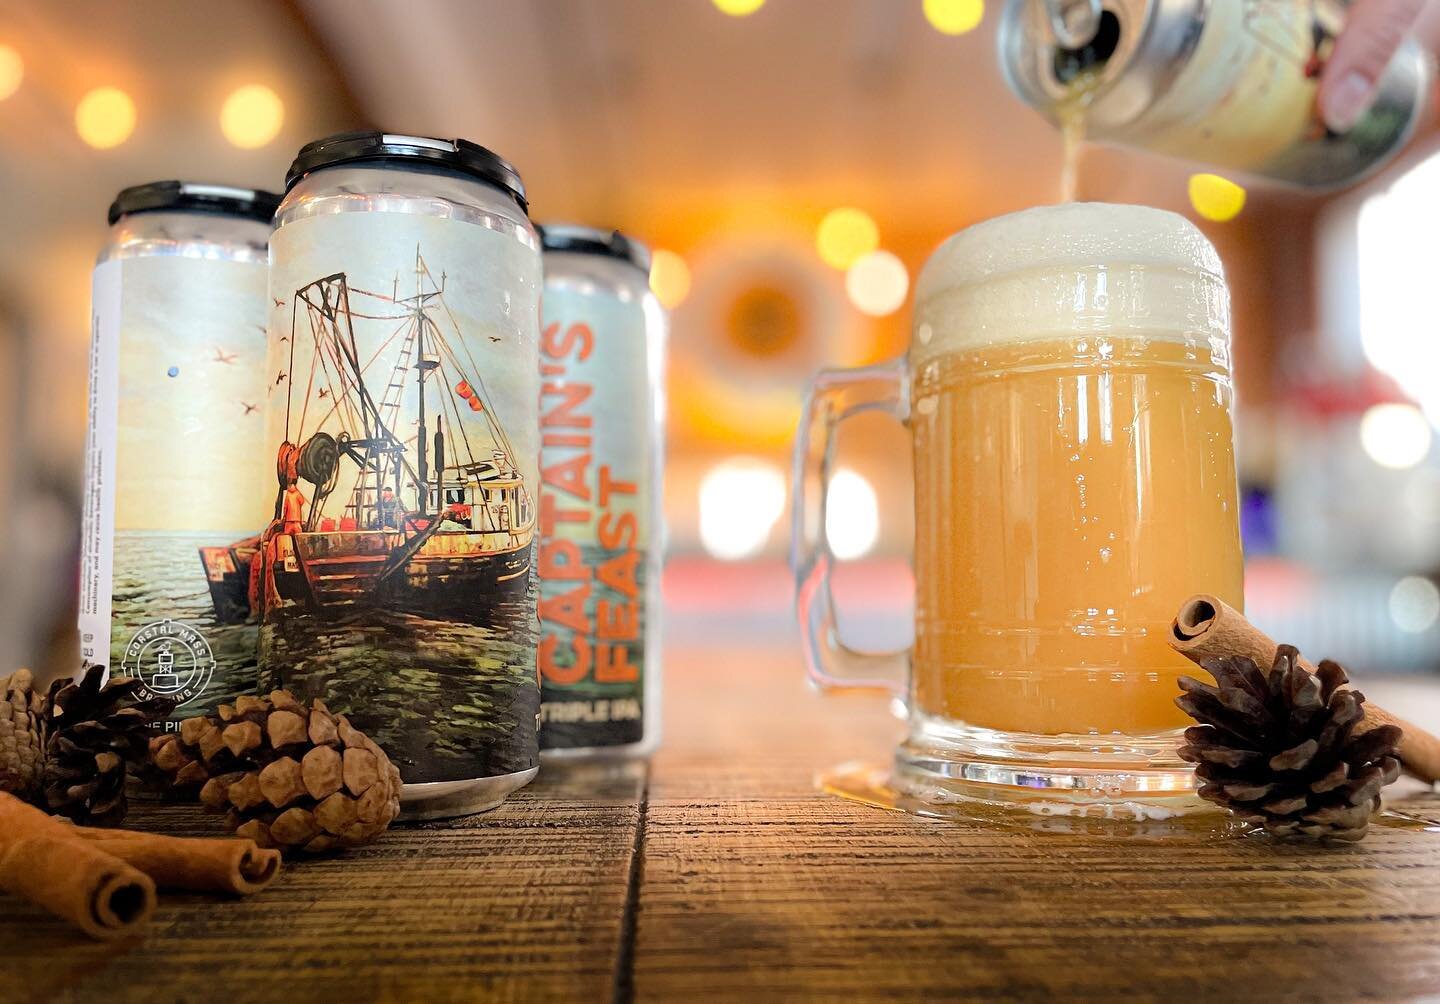 Thanksgiving week is finally here &amp; we have the beers that will pair perfectly with your meals from the turkey to the pumpkin pie! 🦃 🥧 

First up is our long awaited Captain's Feast! Our New England Triple IPA brewed with Citra, Simcoe and Gala